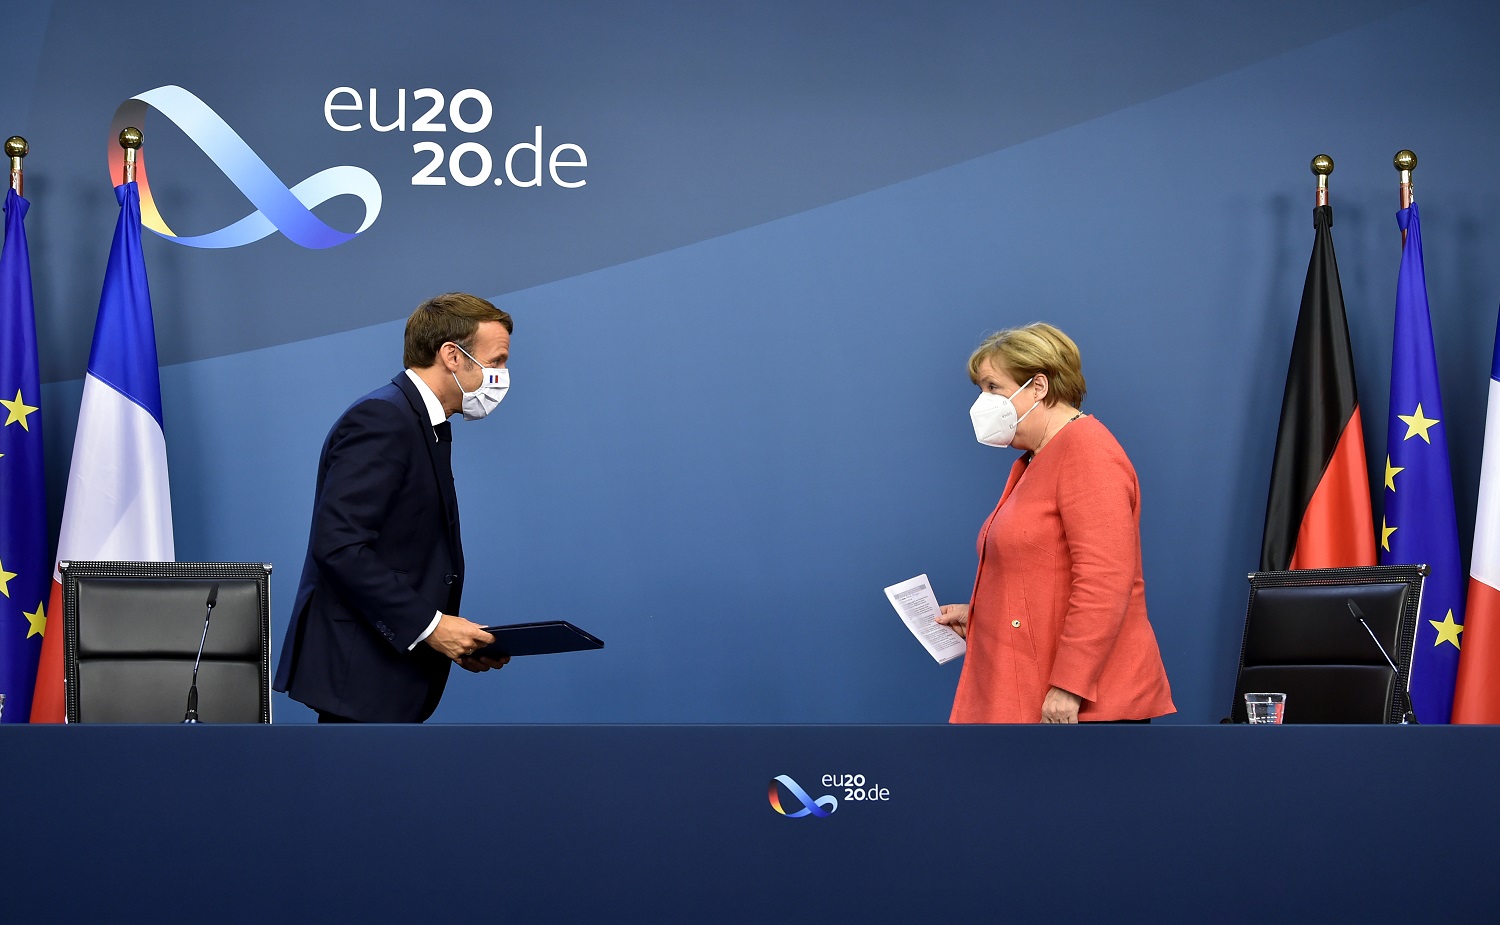 German Chancellor Angela Merkel and French President Emmanuel Macron leave after their joint video press conference at the end of the European summit at the EU headquarters in Brussels, Belgium July 21, 2020. John Thys/Pool via REUTERS